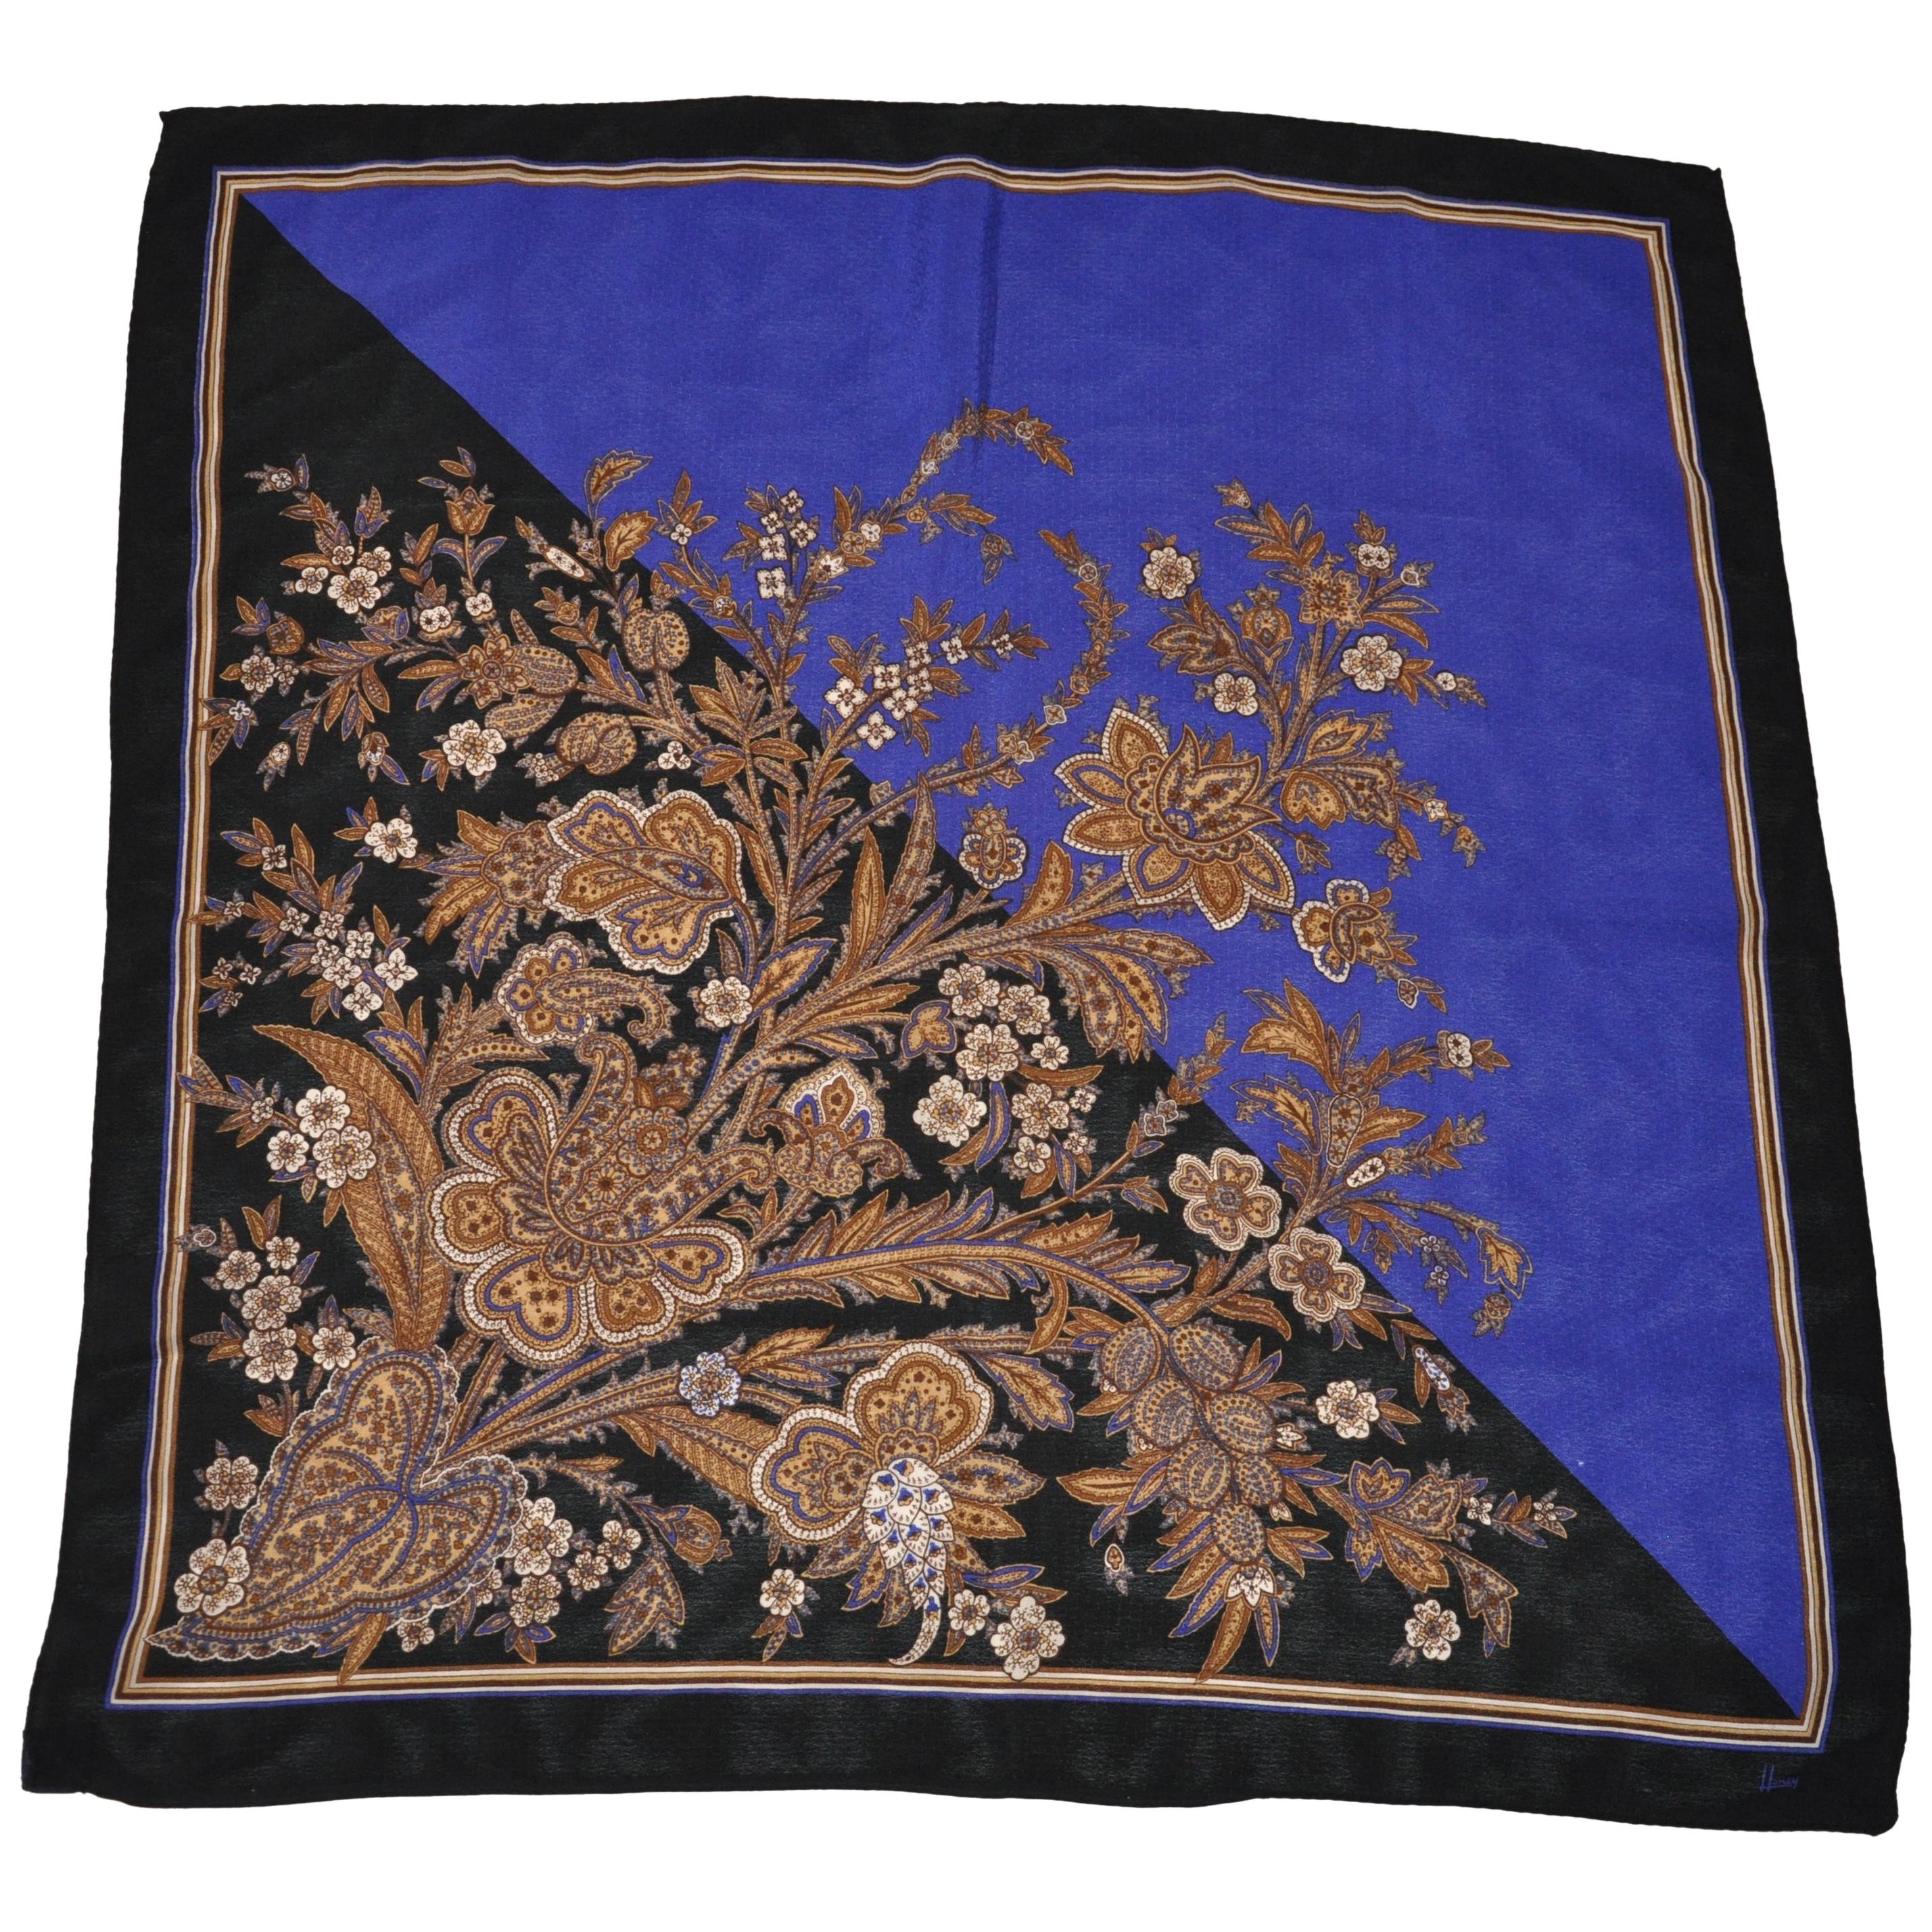 Honey Majestic Royal Blue & Midnight Black "Clusters of Florals" Silk Scarf